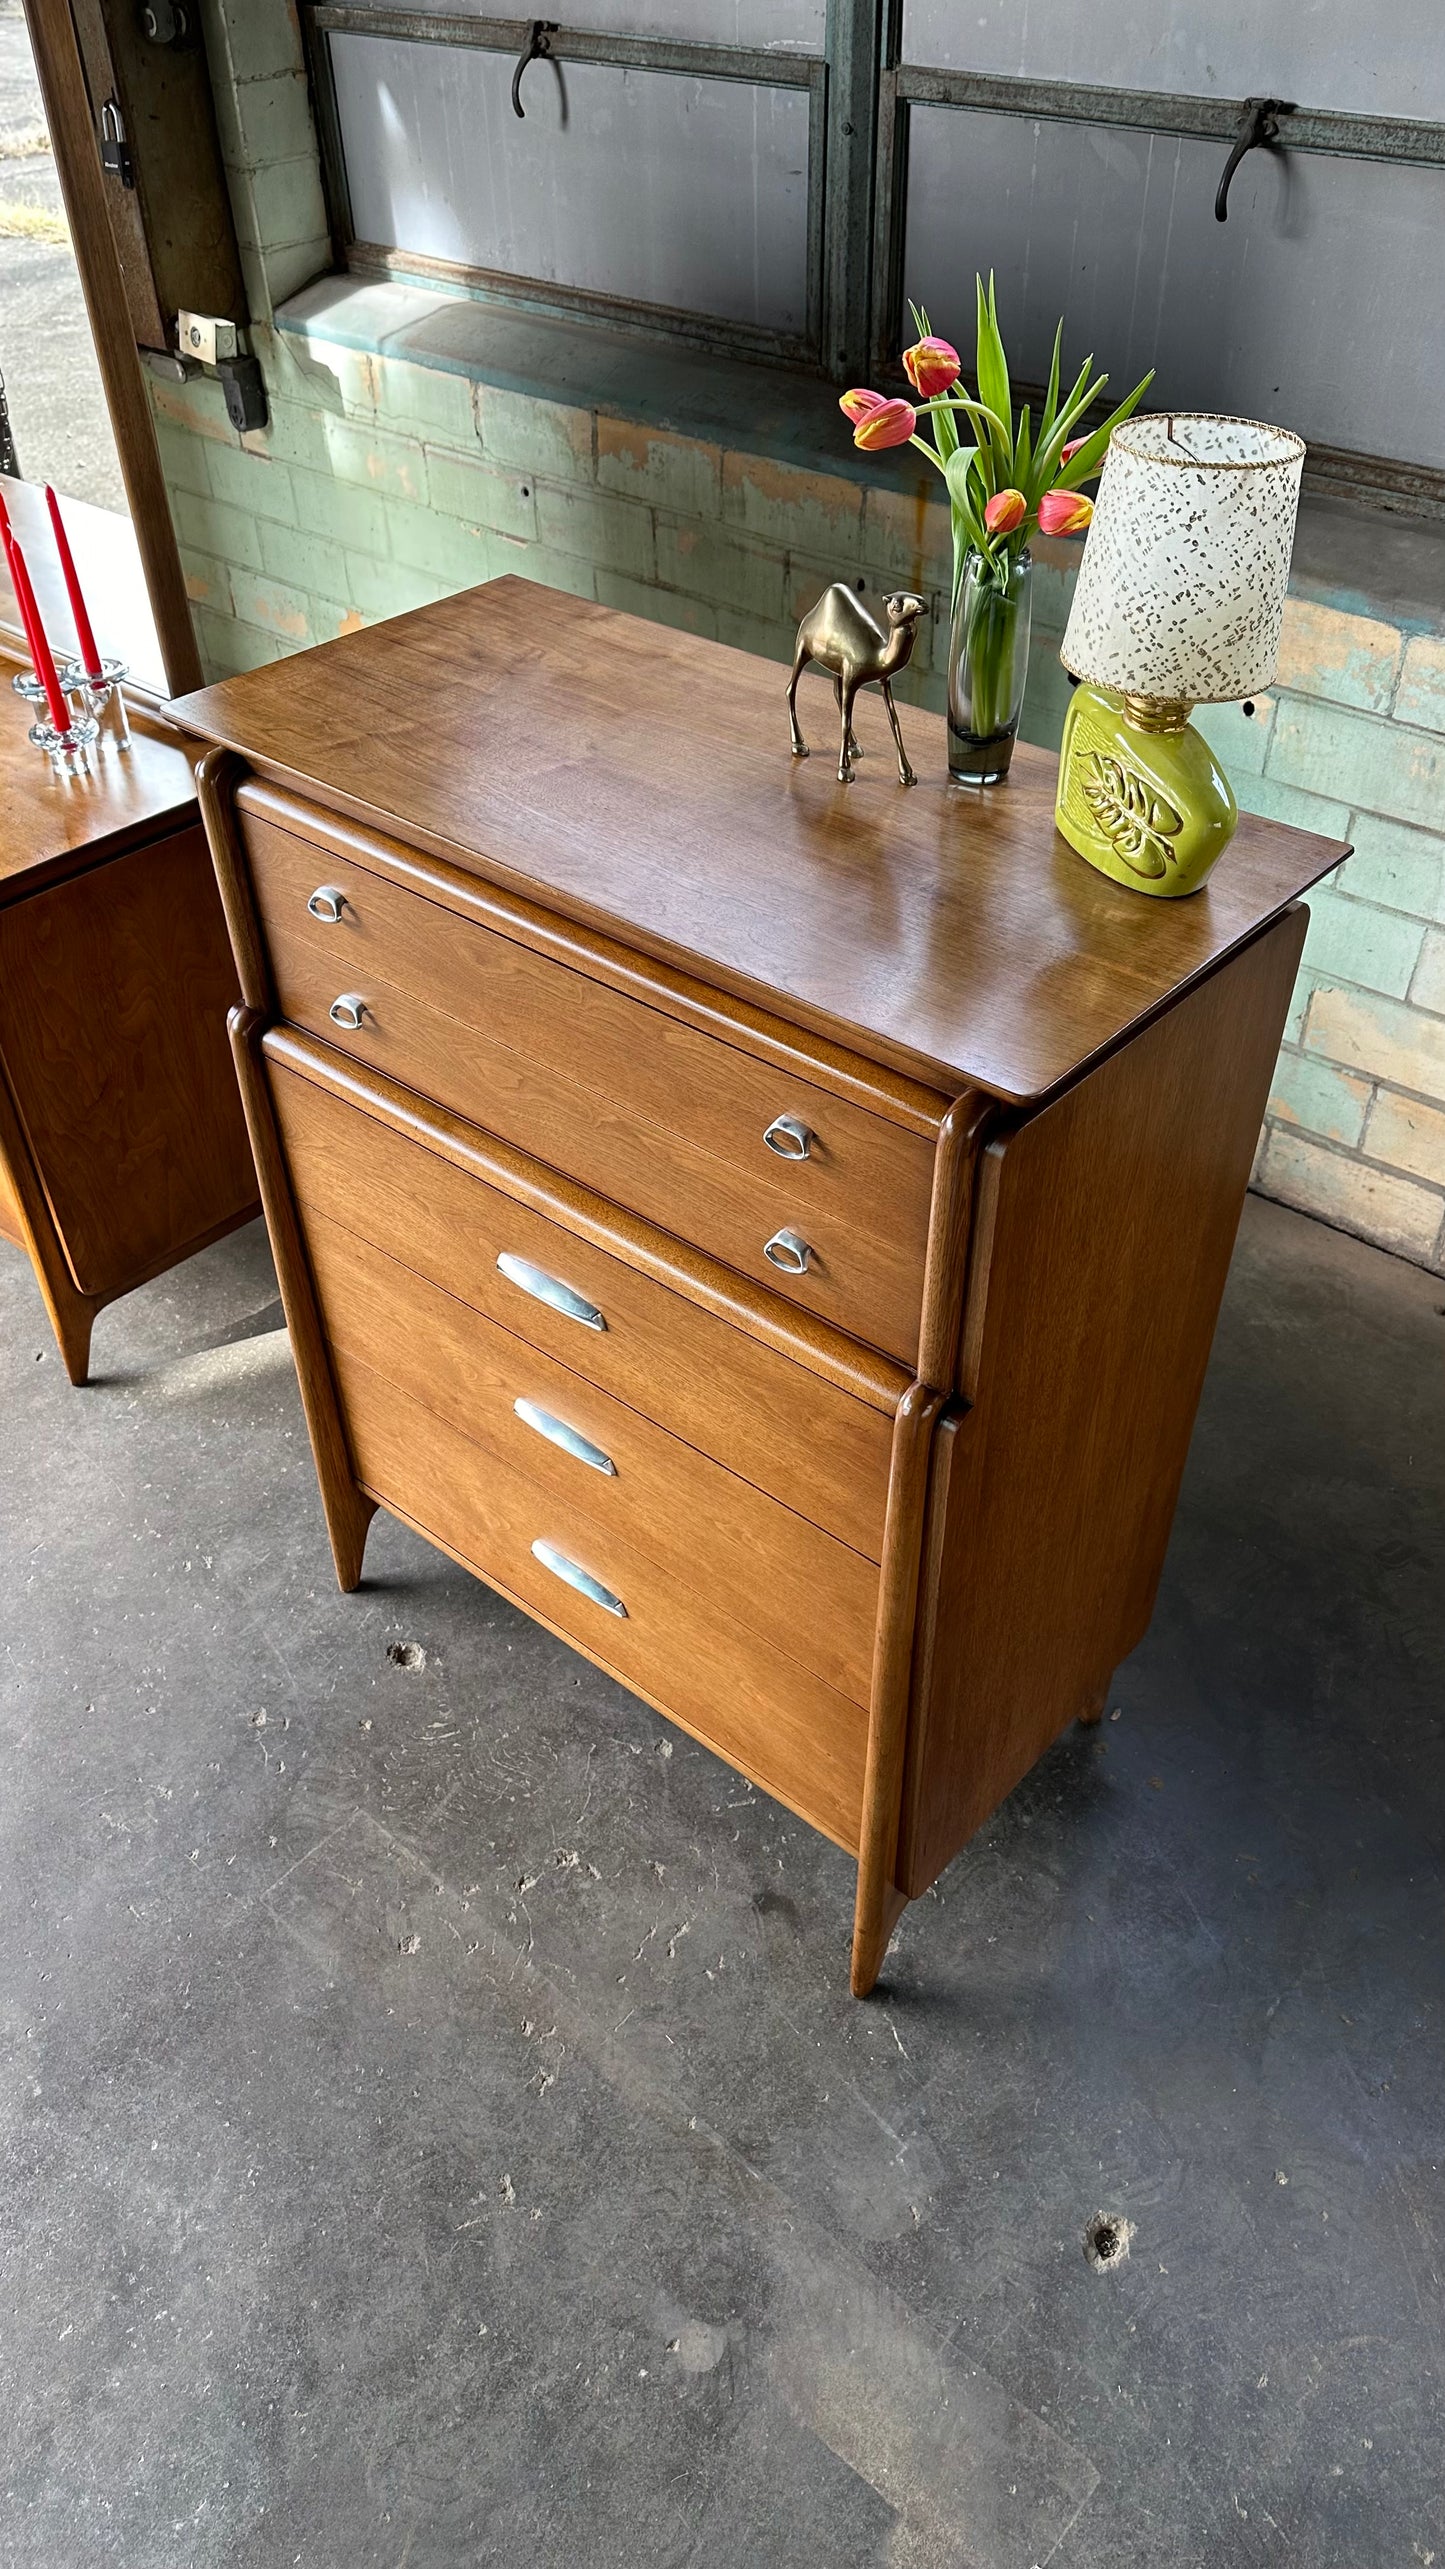 Drexel Projection Five Draw Chest of Drawers